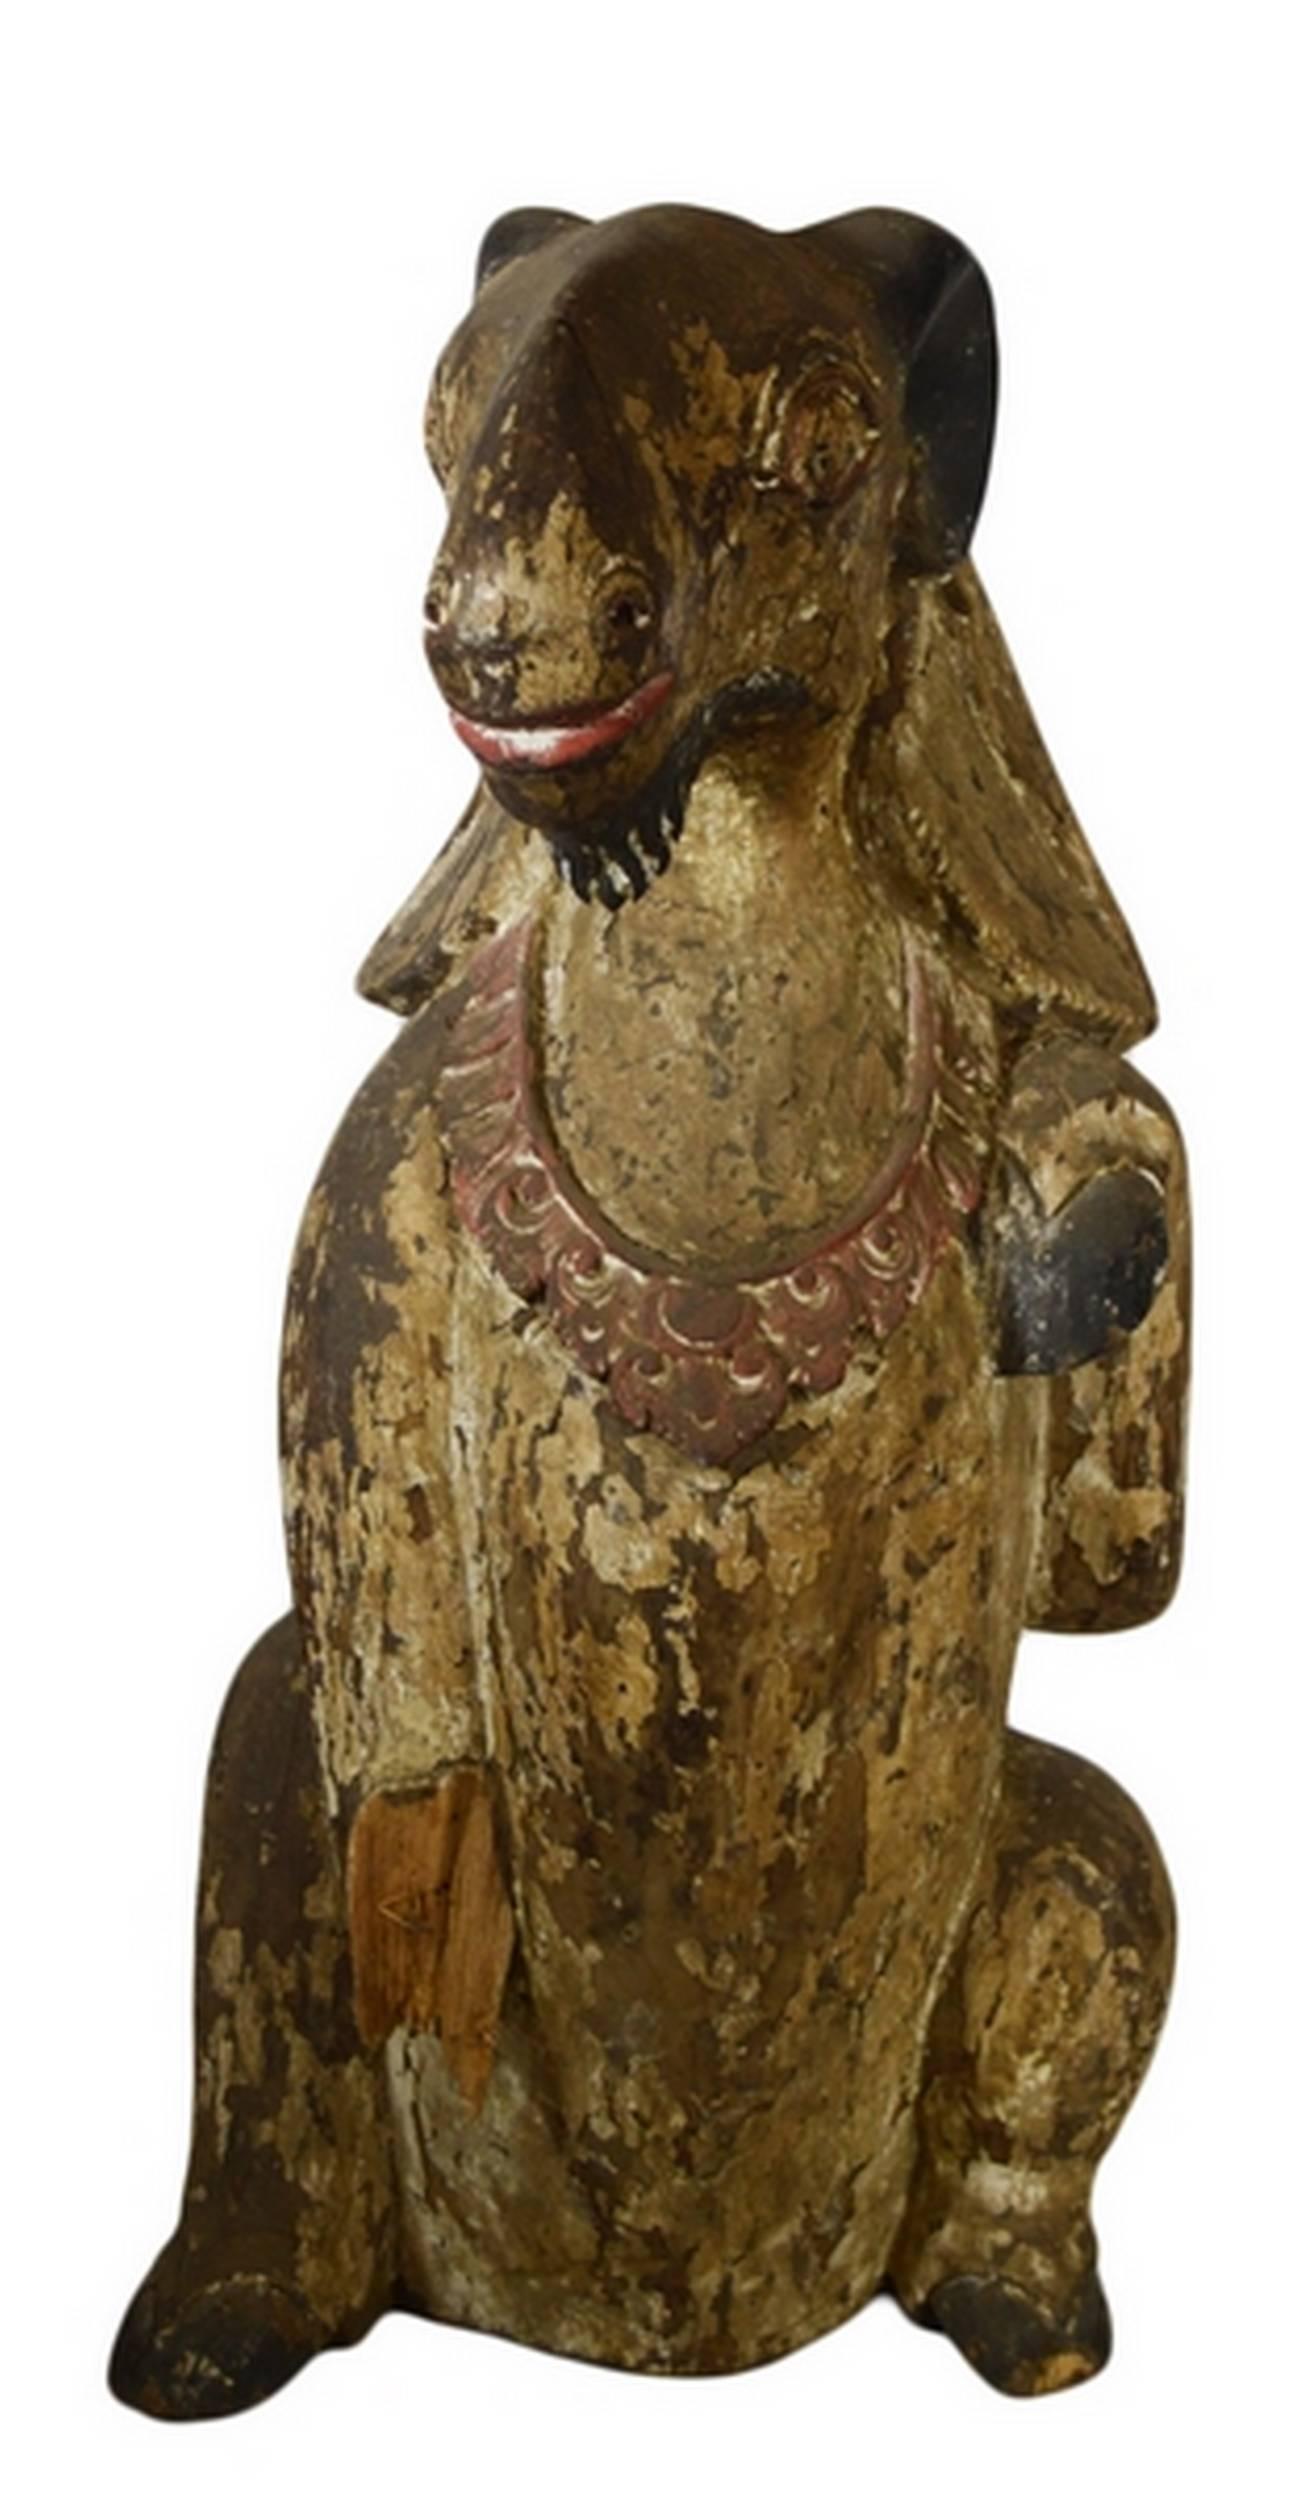 Antique Burmese Hand-Carved Wood Seated Goat Sculpture from the 19th Century For Sale 2